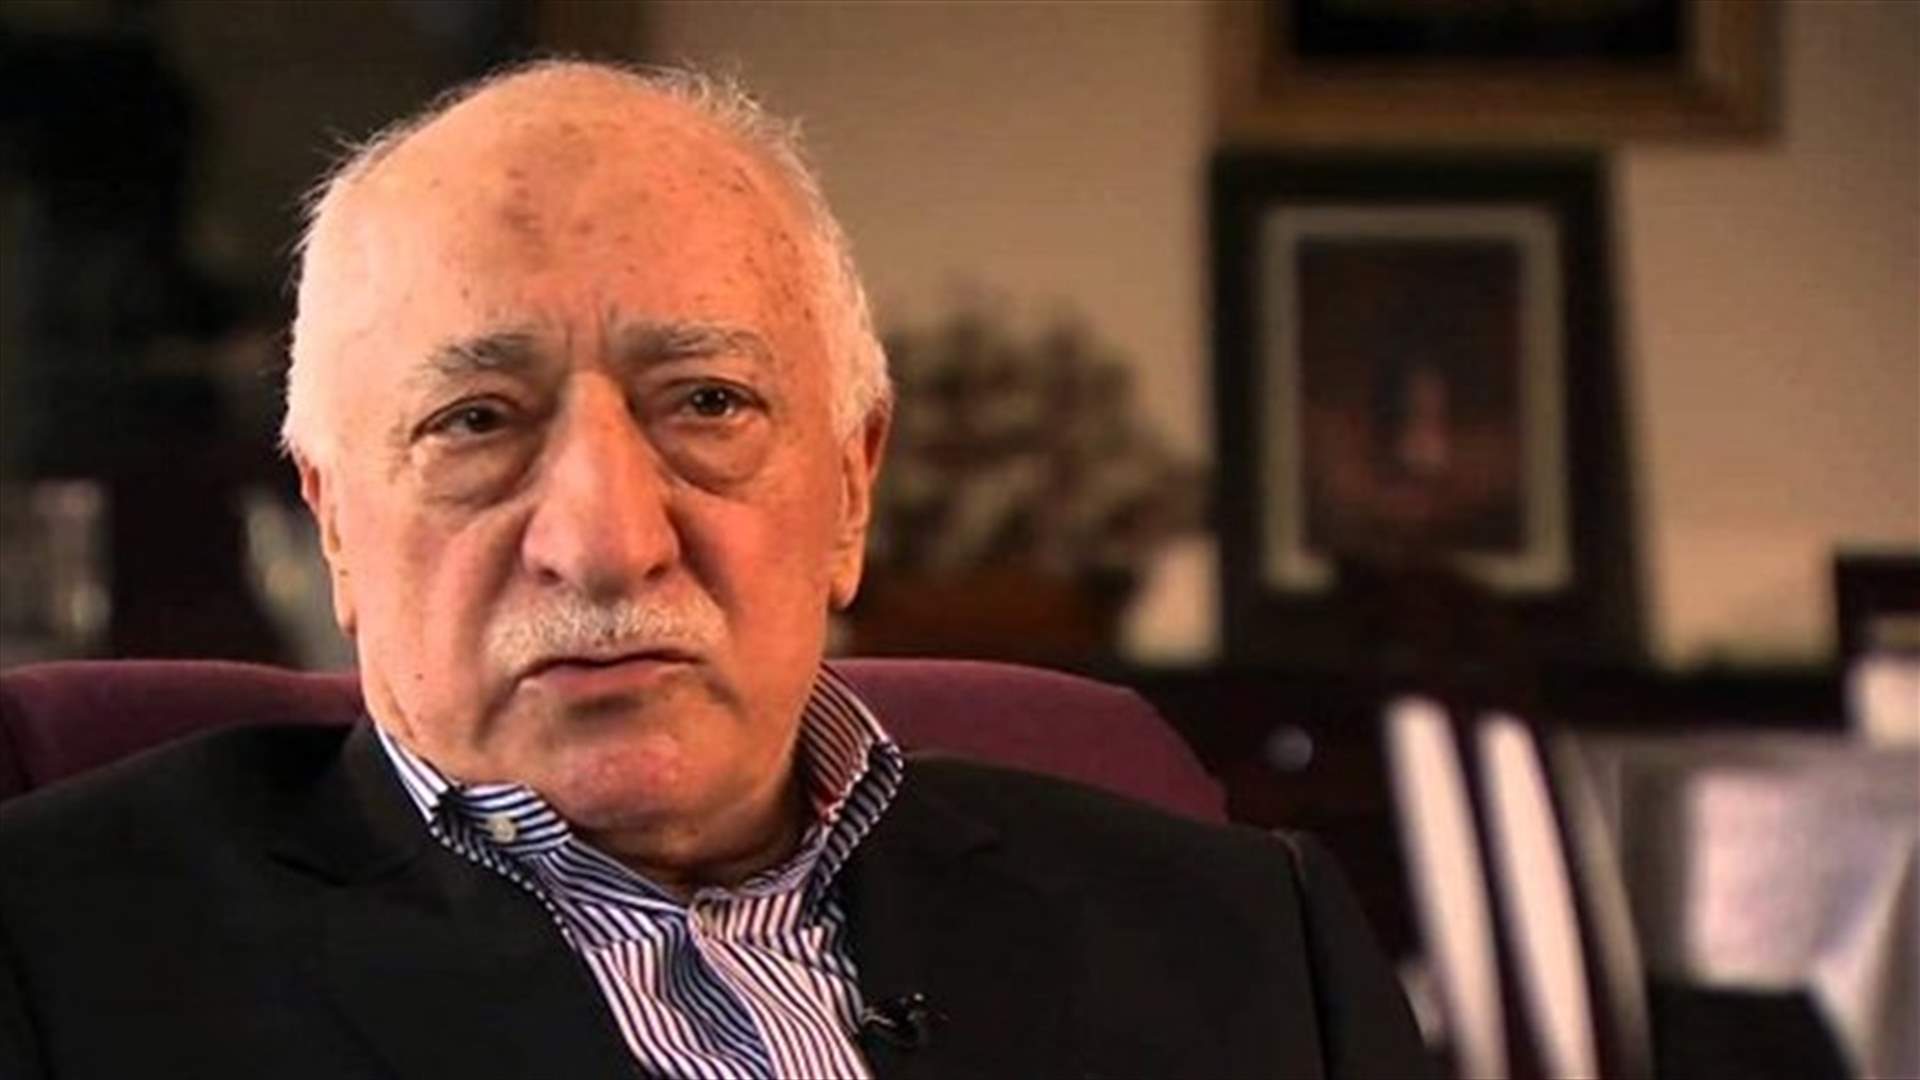 Turkey formally requests U.S. arrest of cleric Gulen over coup plot - NTV